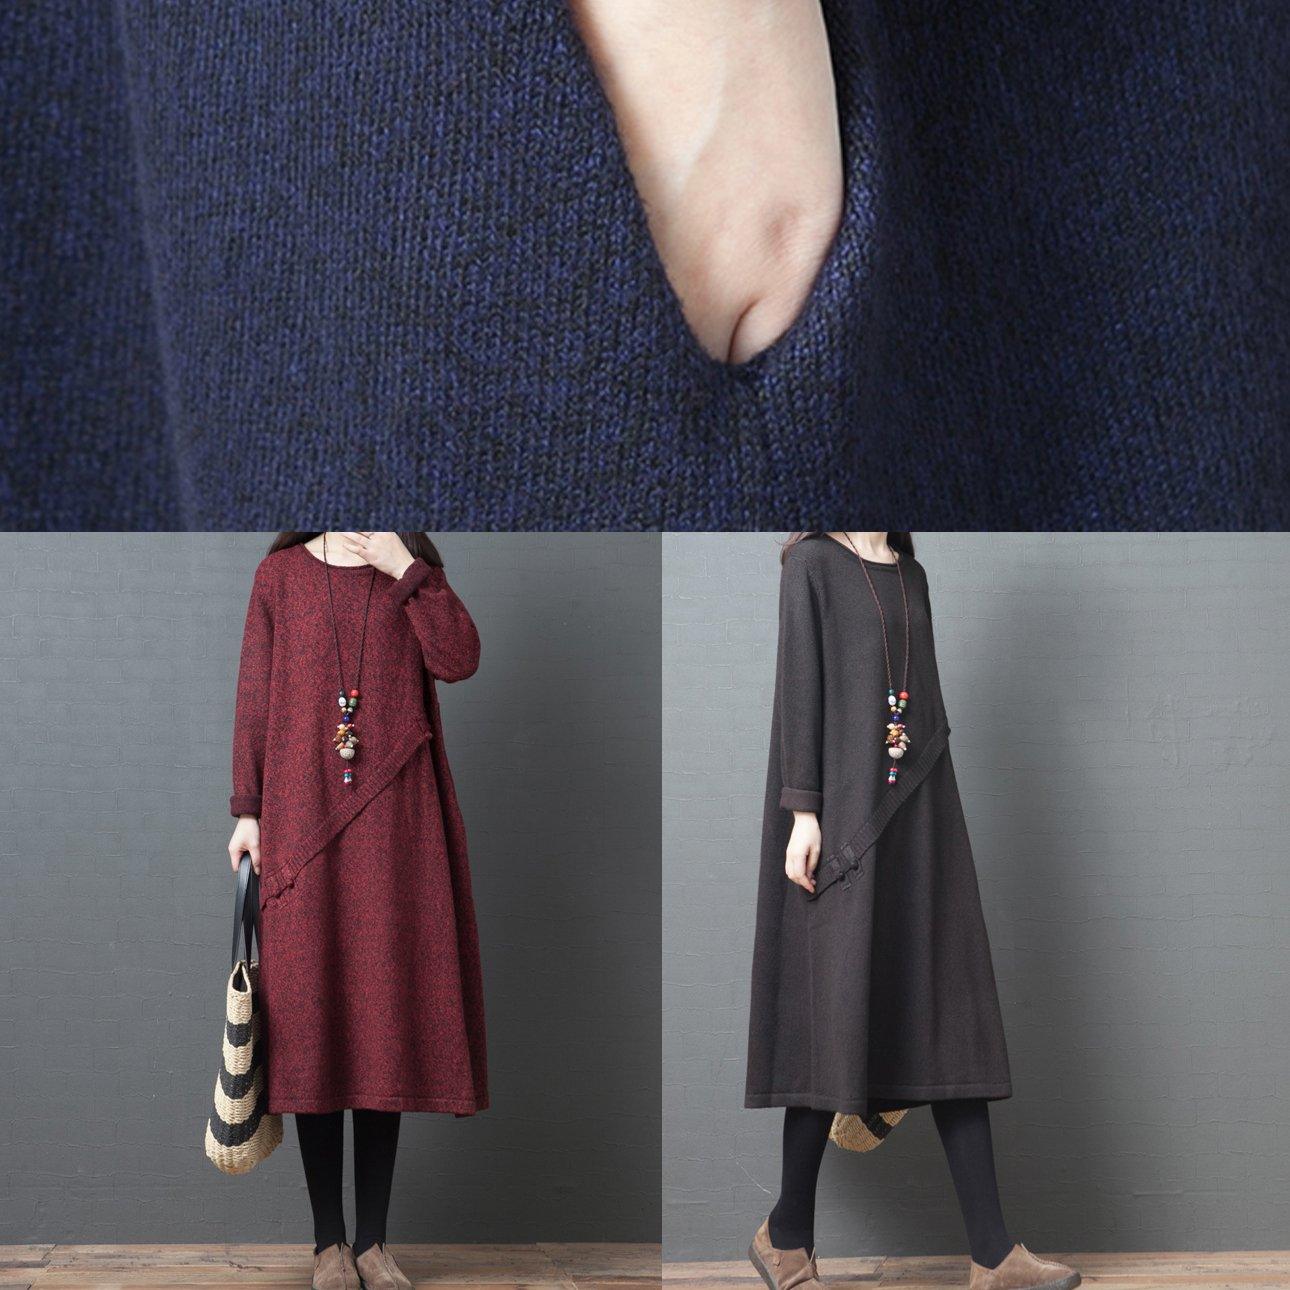 Simple chocolate Sweater dress outfit Street Style o neck pockets tunic knit dresses - Omychic